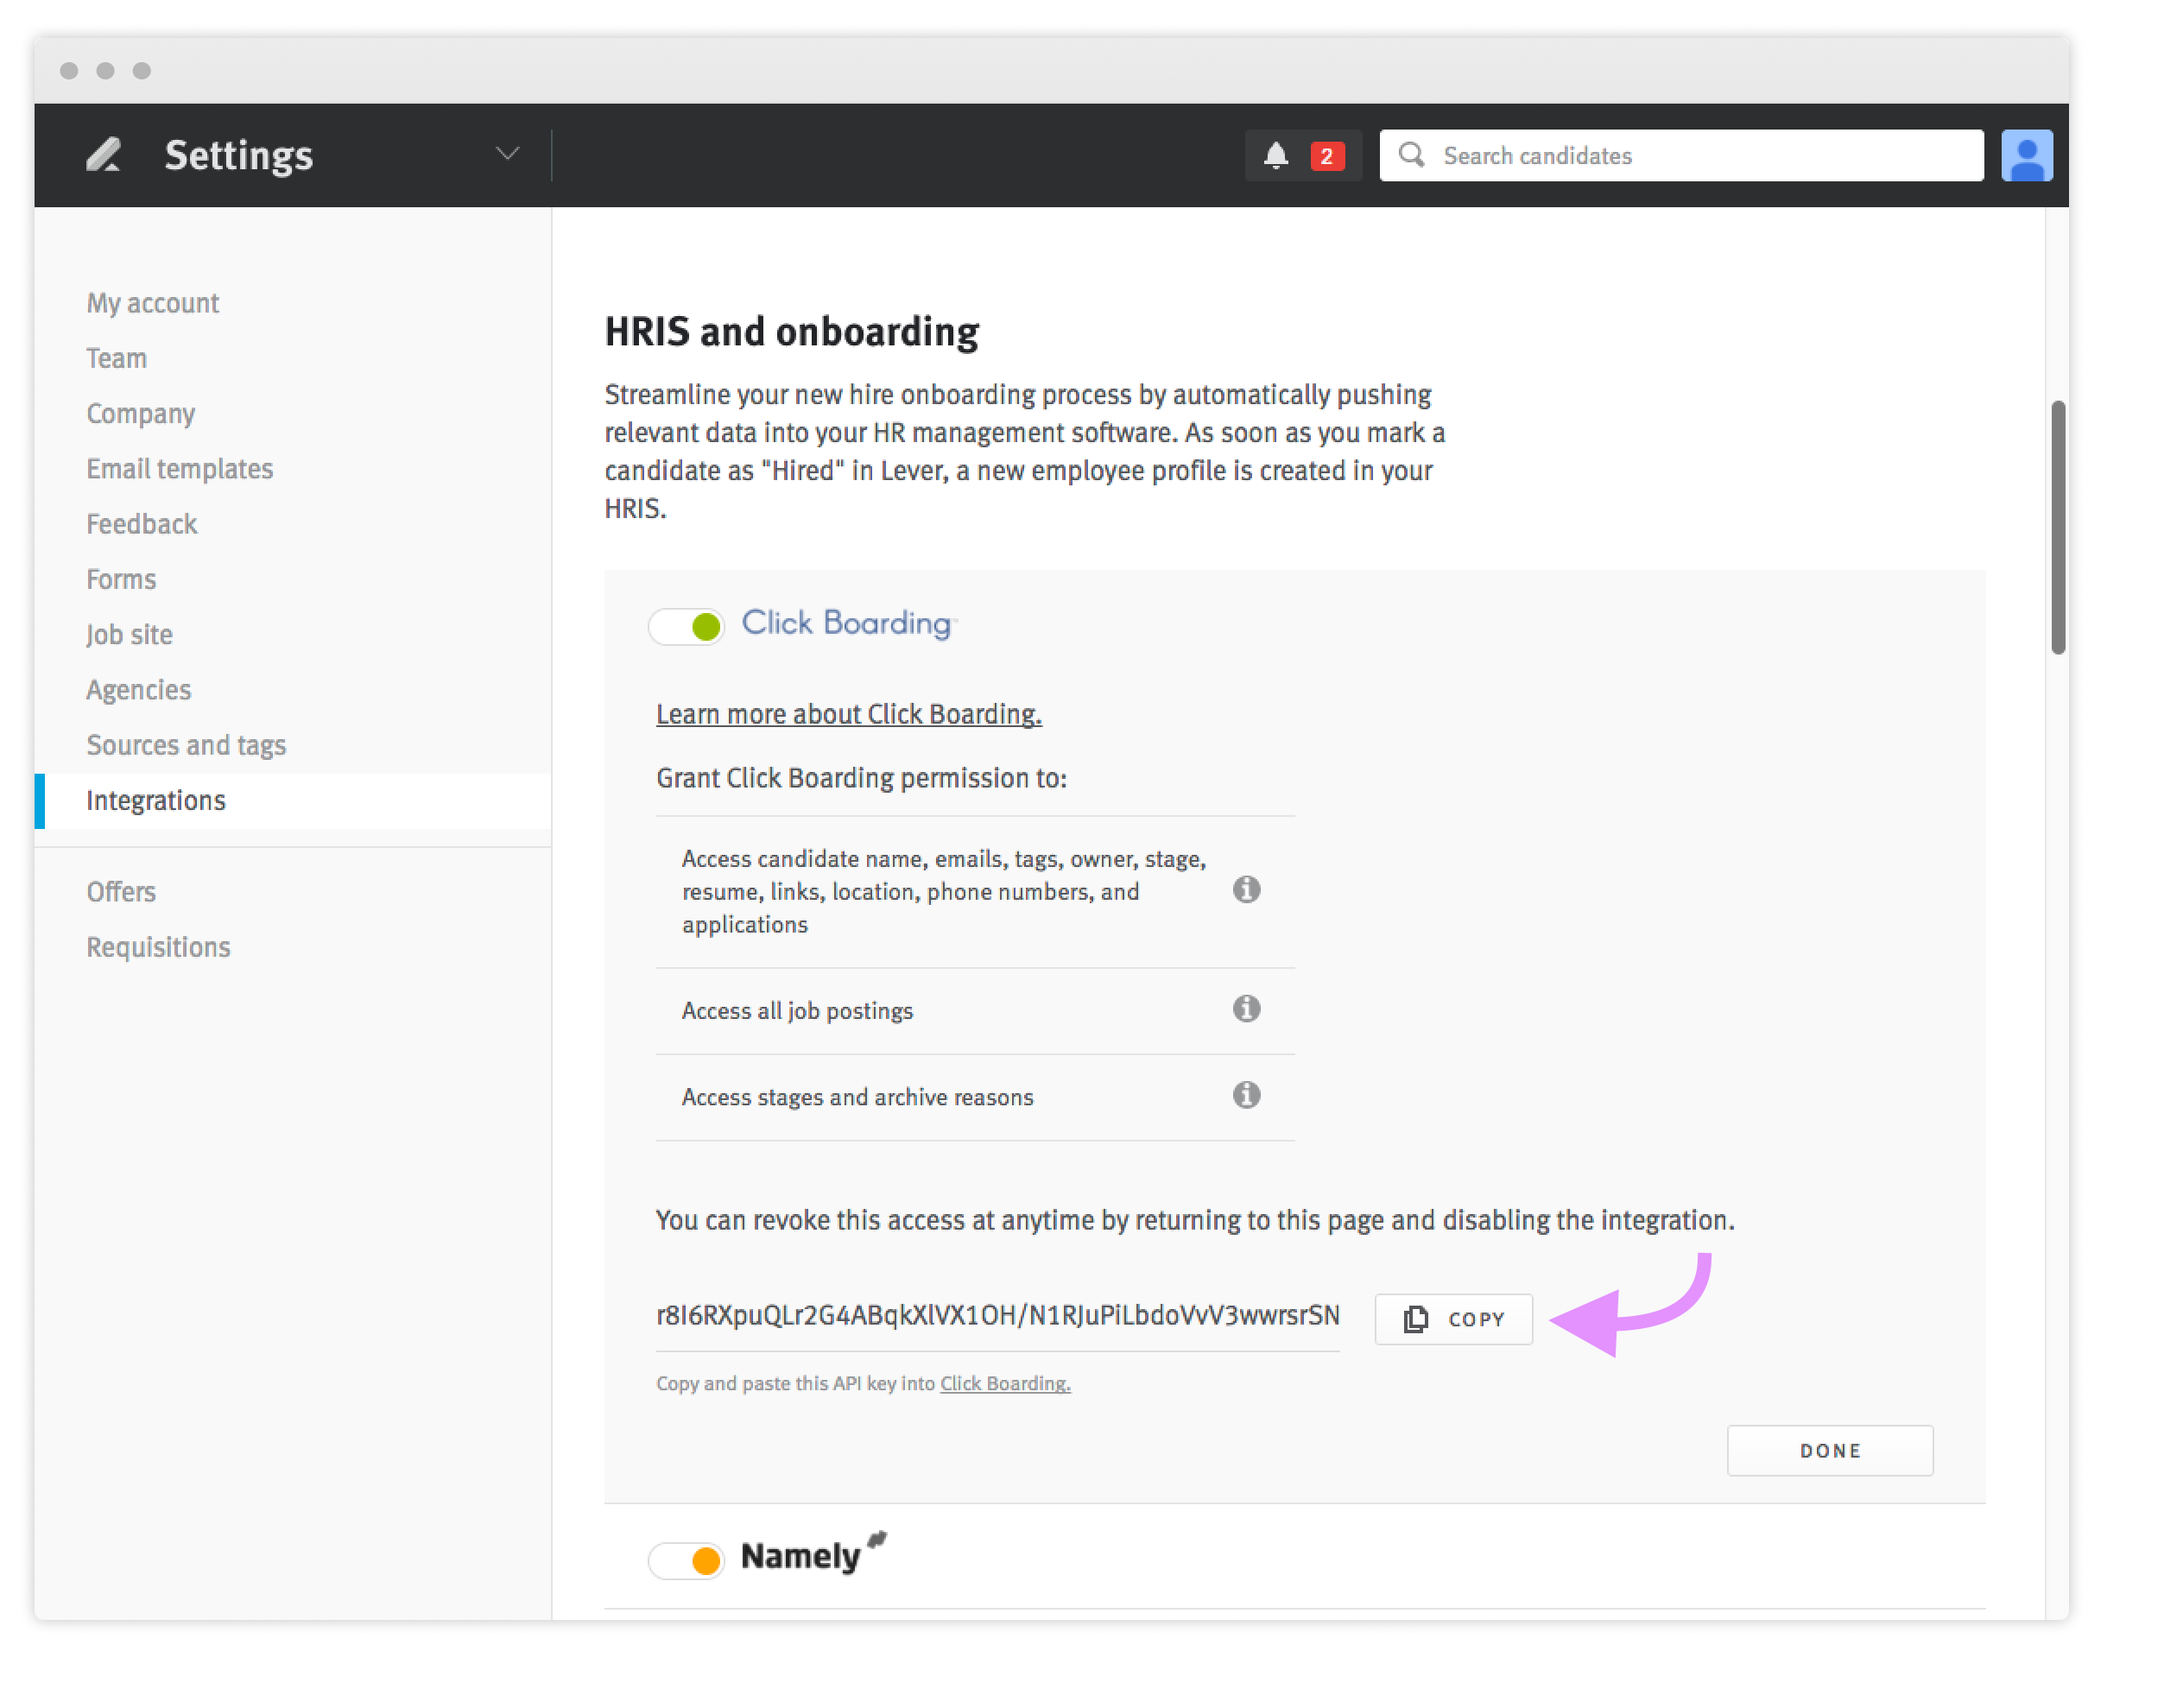 Lever integrations settings page with arrow pointing to the copy button next to the API key in the HRIS and onboarding section